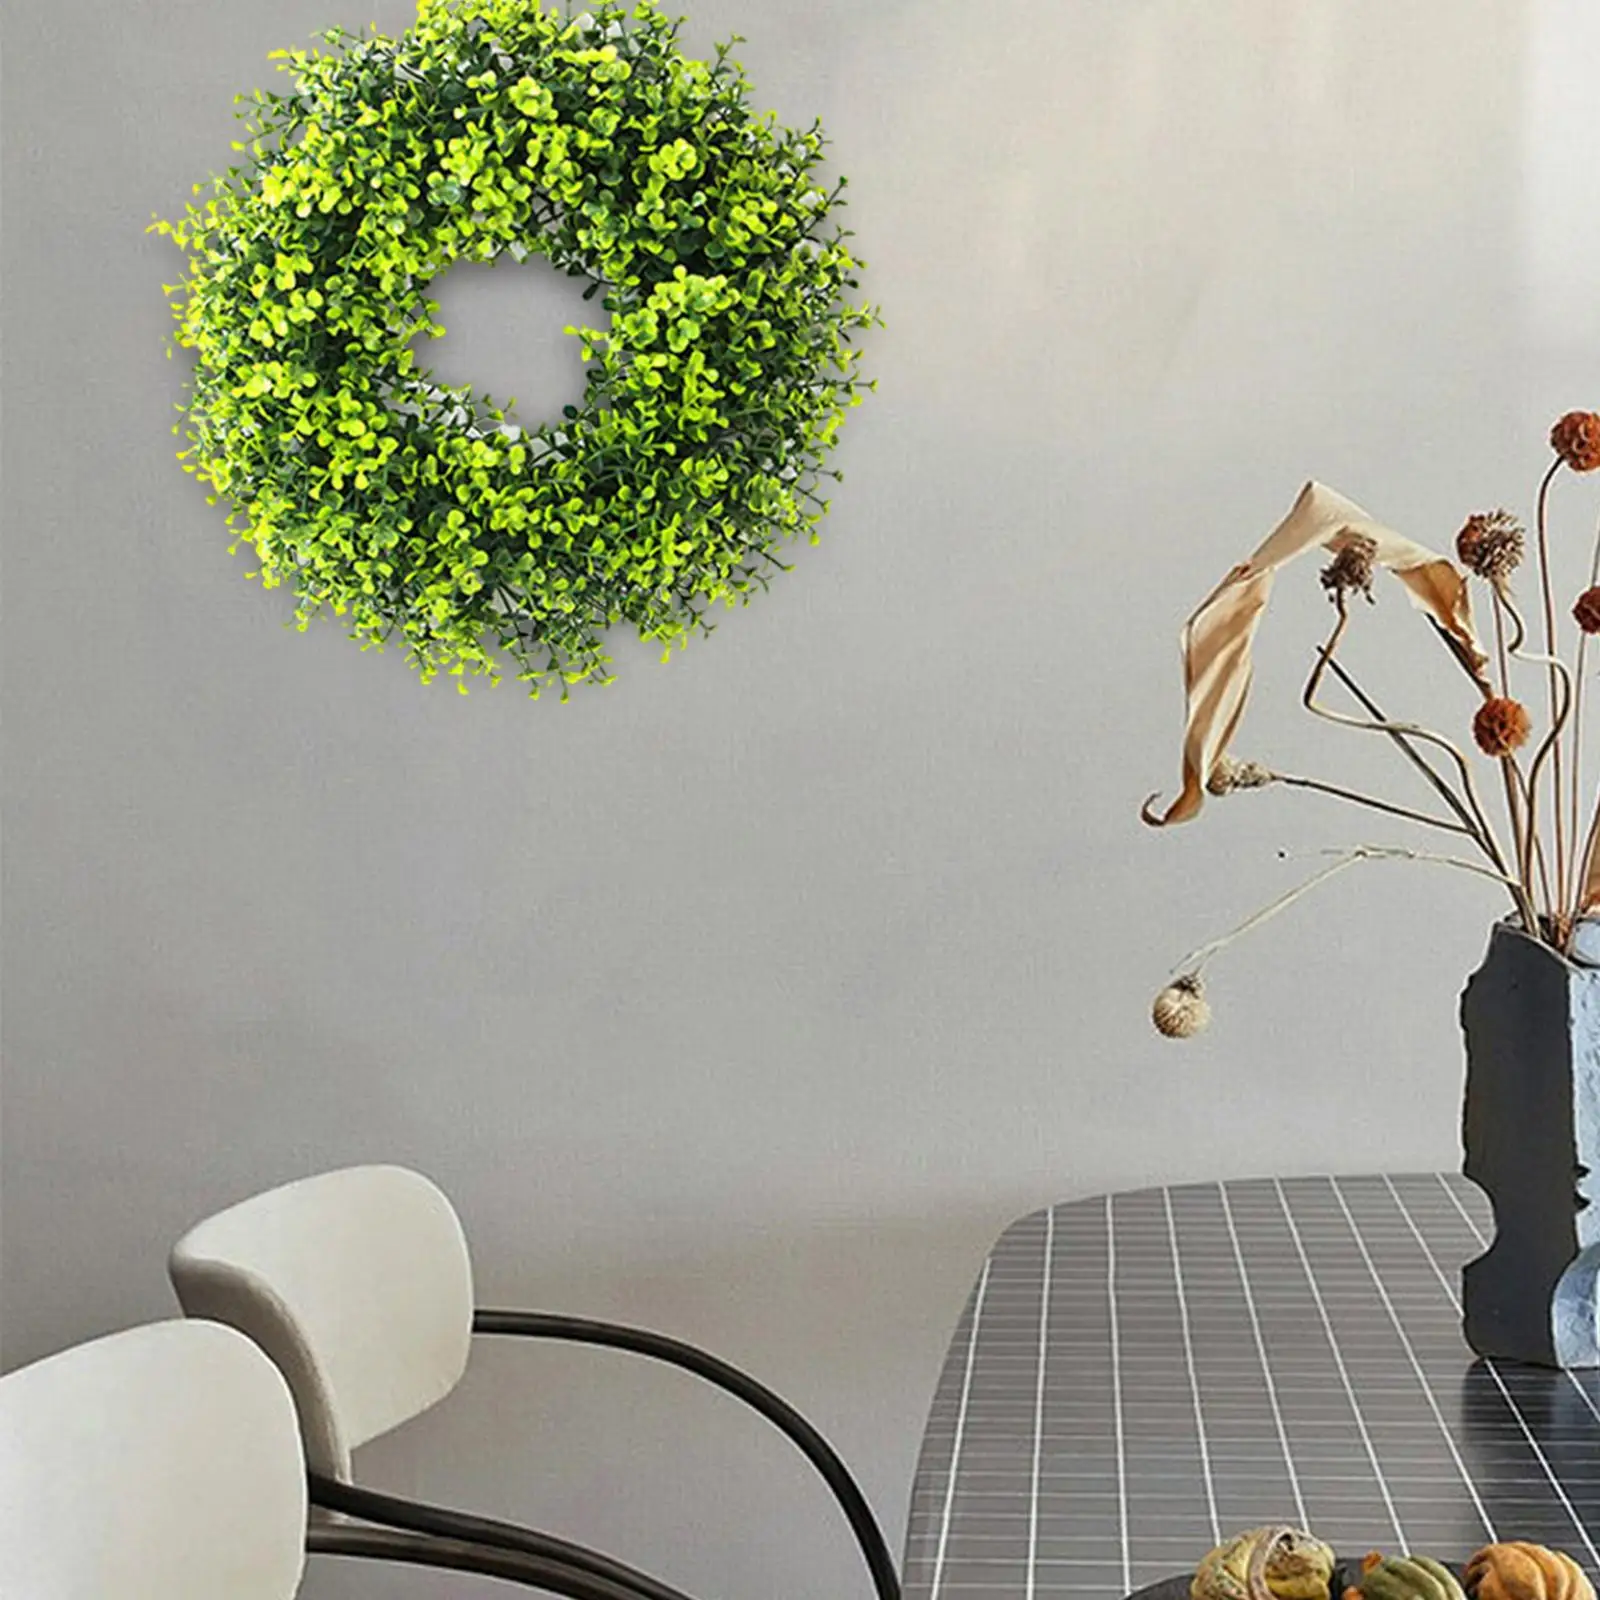 Artificial Garland Simulation Wreaths Floral Hoop Green Leaves Wreath for Office Decor Farmhouse Home Outdoor Decoration